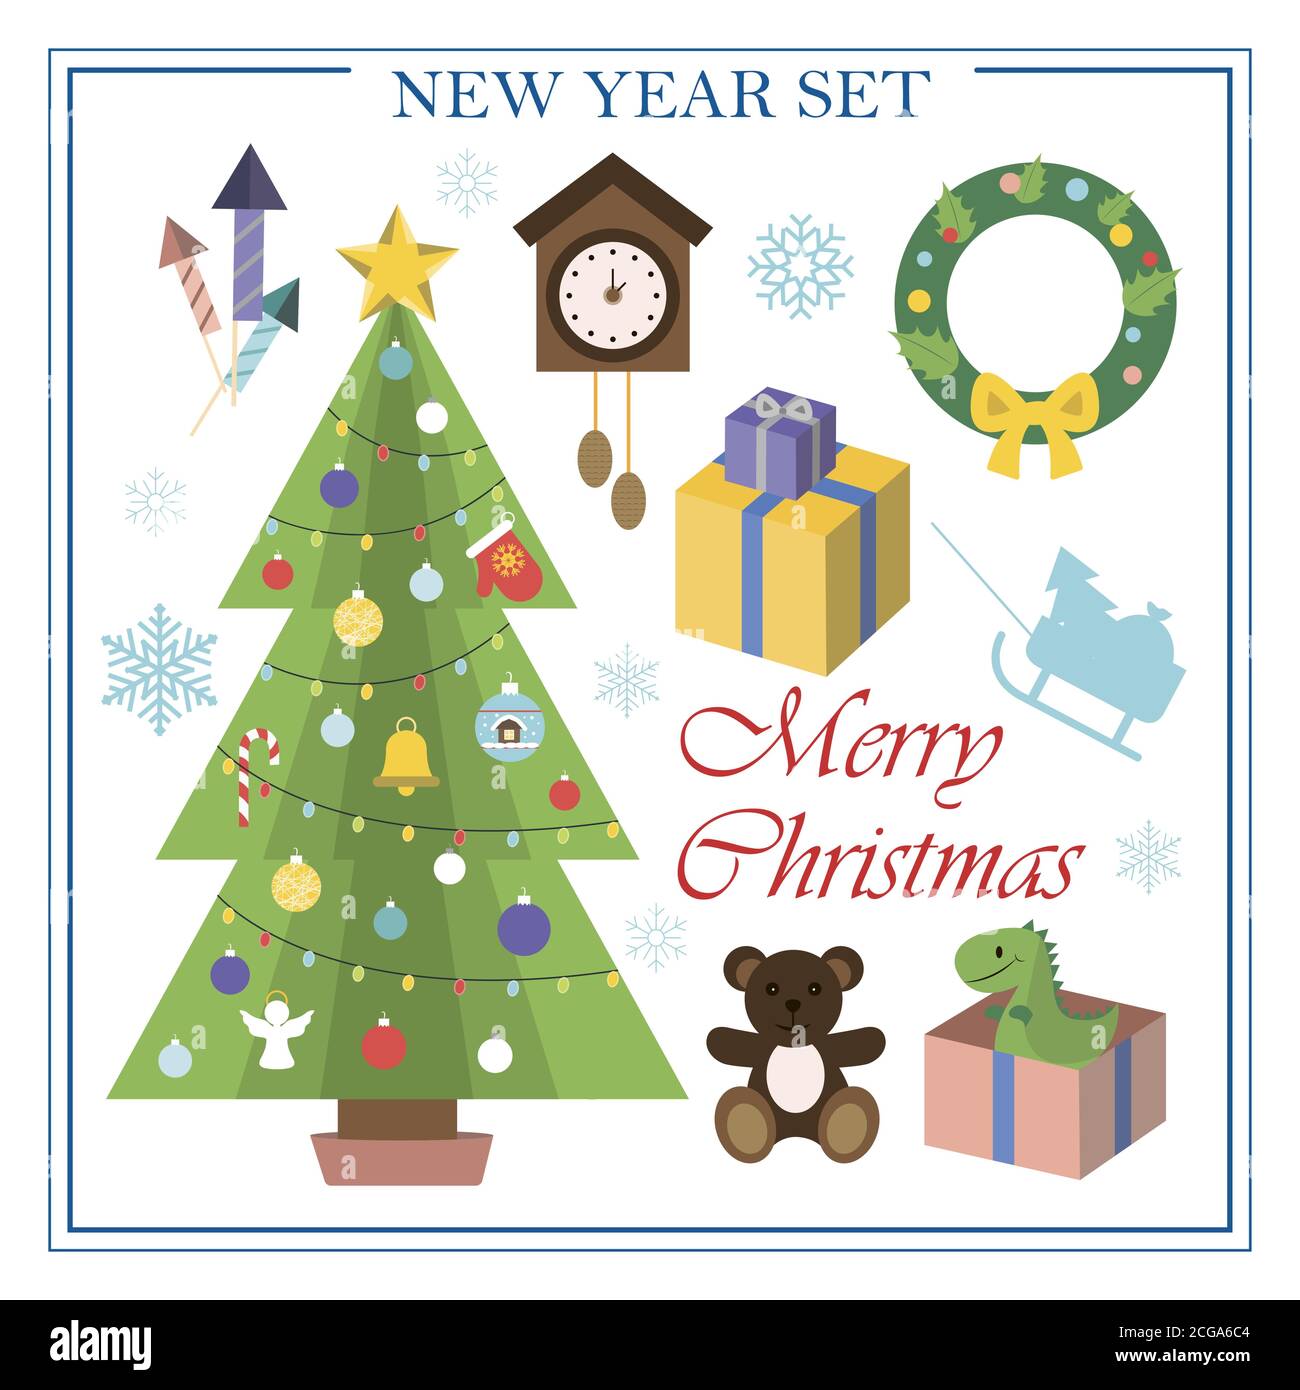 A set of flat illustrations for new year and Christmas. Vector set of isolated images Christmas tree, Christmas wreath on the door, Packed gifts under the tree, clock, firecrackers. Bright objects for a postcard, ad, sale, or website with a new year s theme. Happy Winter Holidays poster. New year Stock Vector